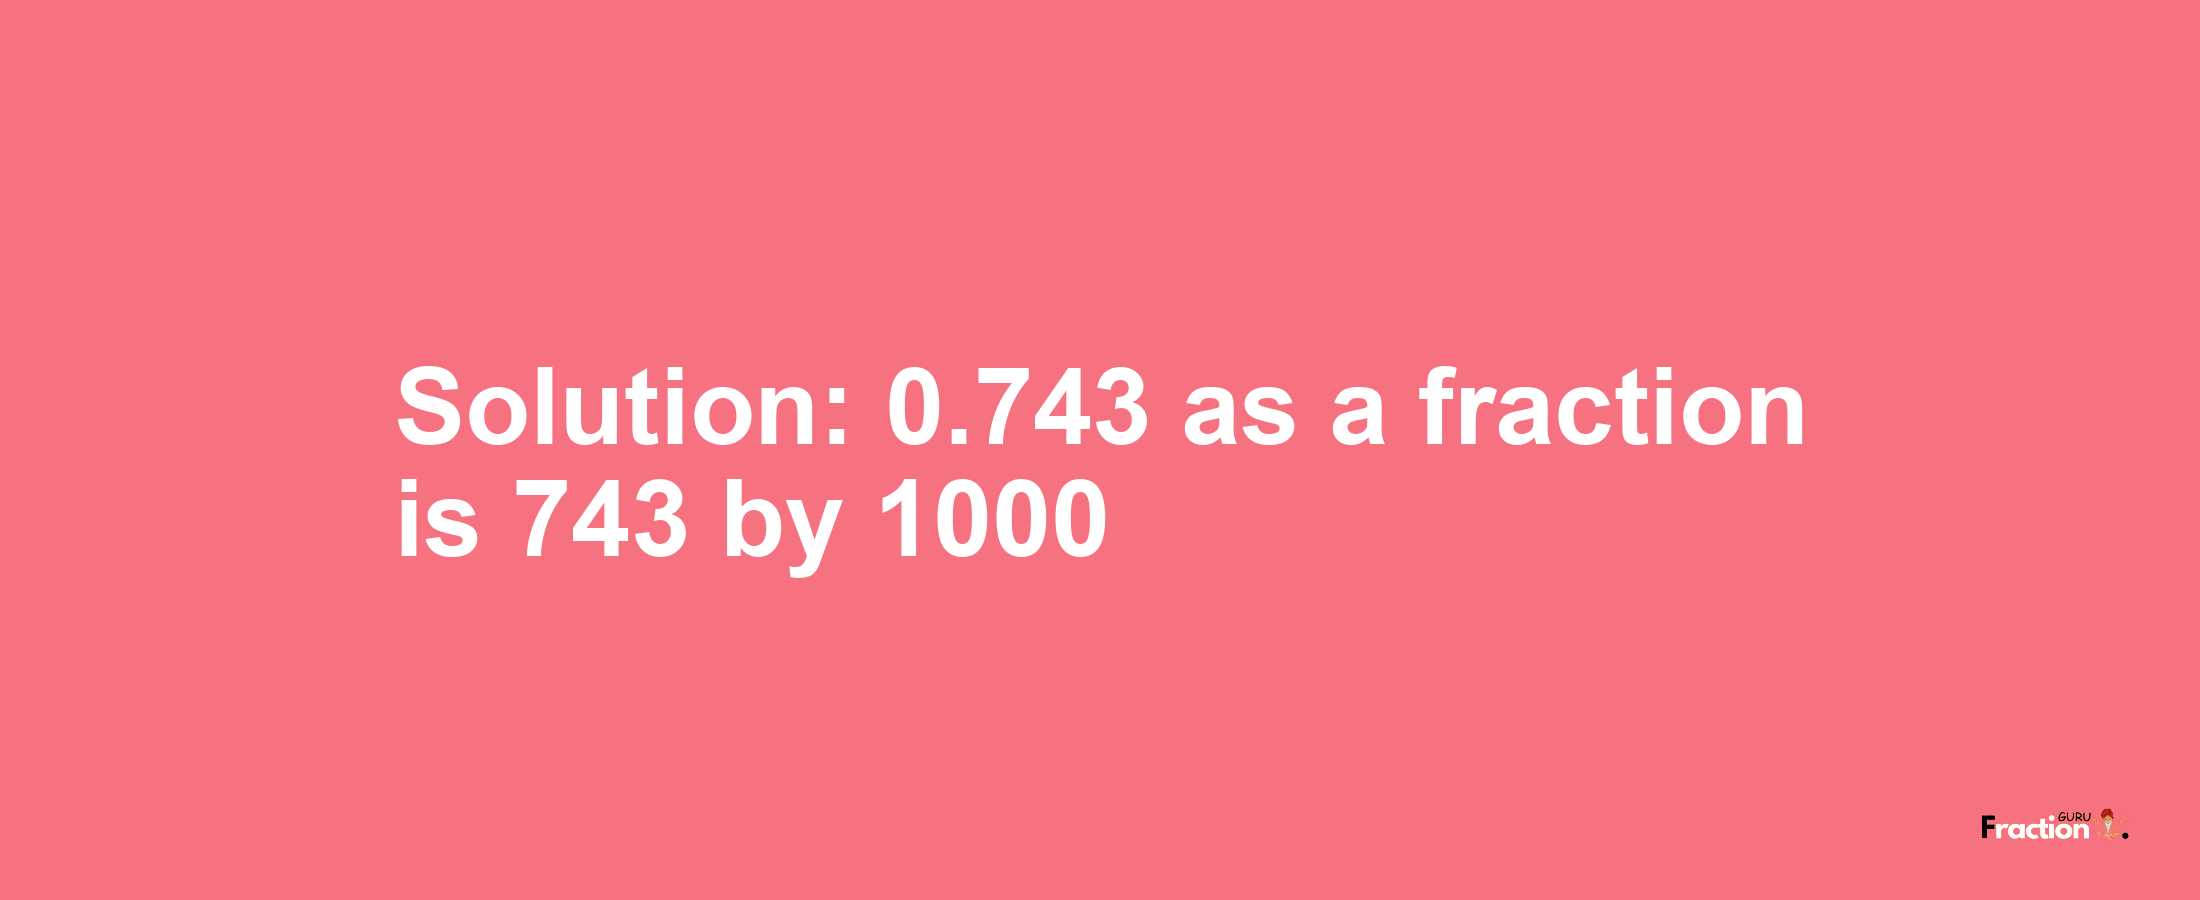 Solution:0.743 as a fraction is 743/1000